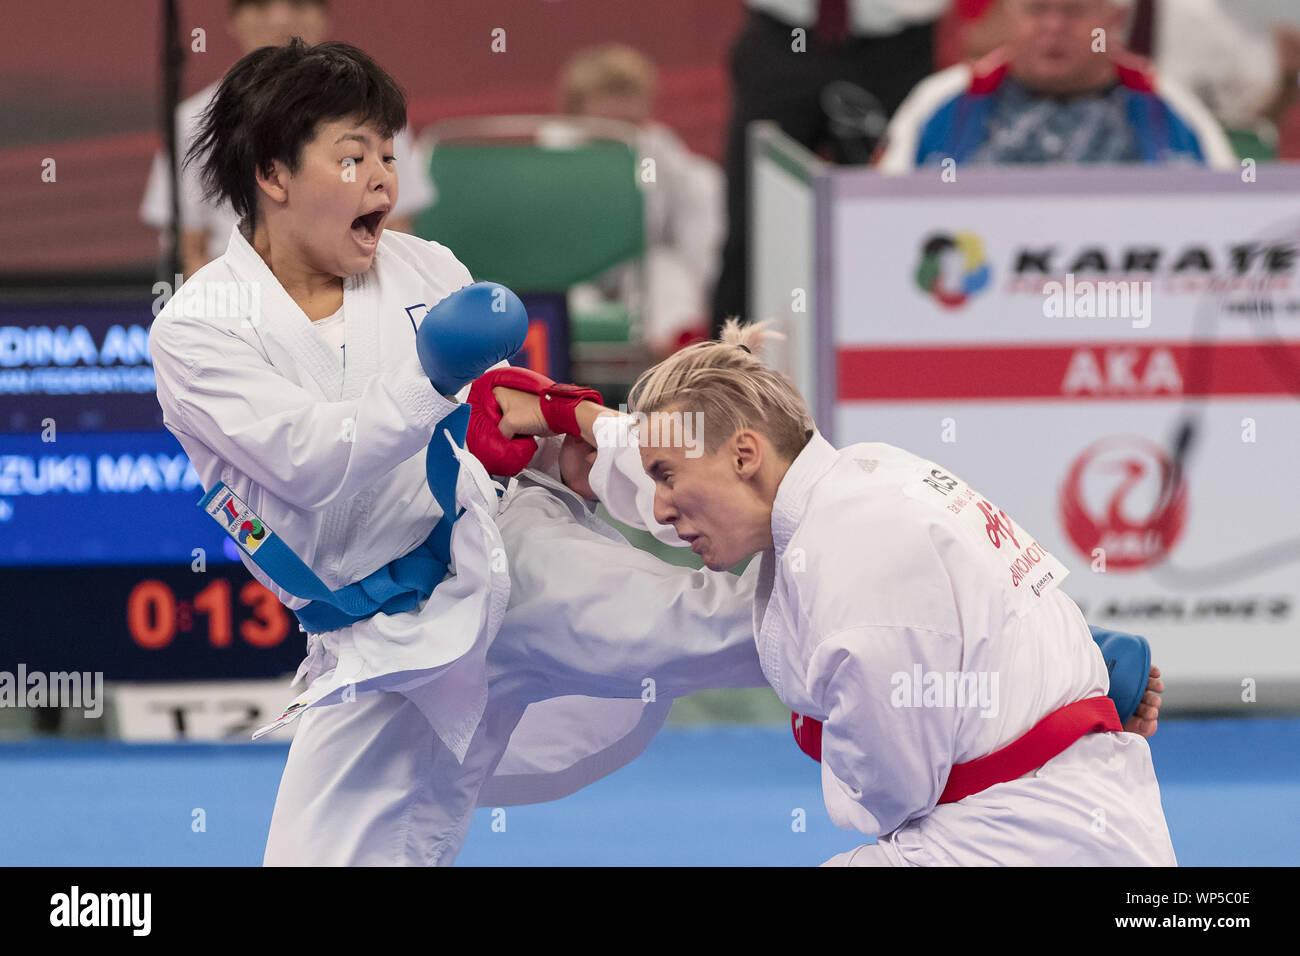 Tokyo, Japan. 7th Sep, 2019. Maya Suzuki of Japan (blue) fights against Anna Rodina of Russian Federation (red) during the Repechage of Female Kumite's -61 kg category at Karate1 Premier League Tokyo 2019. The Karate1 Premier League is held from September 6 to 8 at the Nippon Budokan. The KarateÂ will make its debut appearanceÂ at the Tokyo 2020 Summer Olympic Games. Maya Suzuki won the bout. Credit: Rodrigo Reyes Marin/ZUMA Wire/Alamy Live News Stock Photo